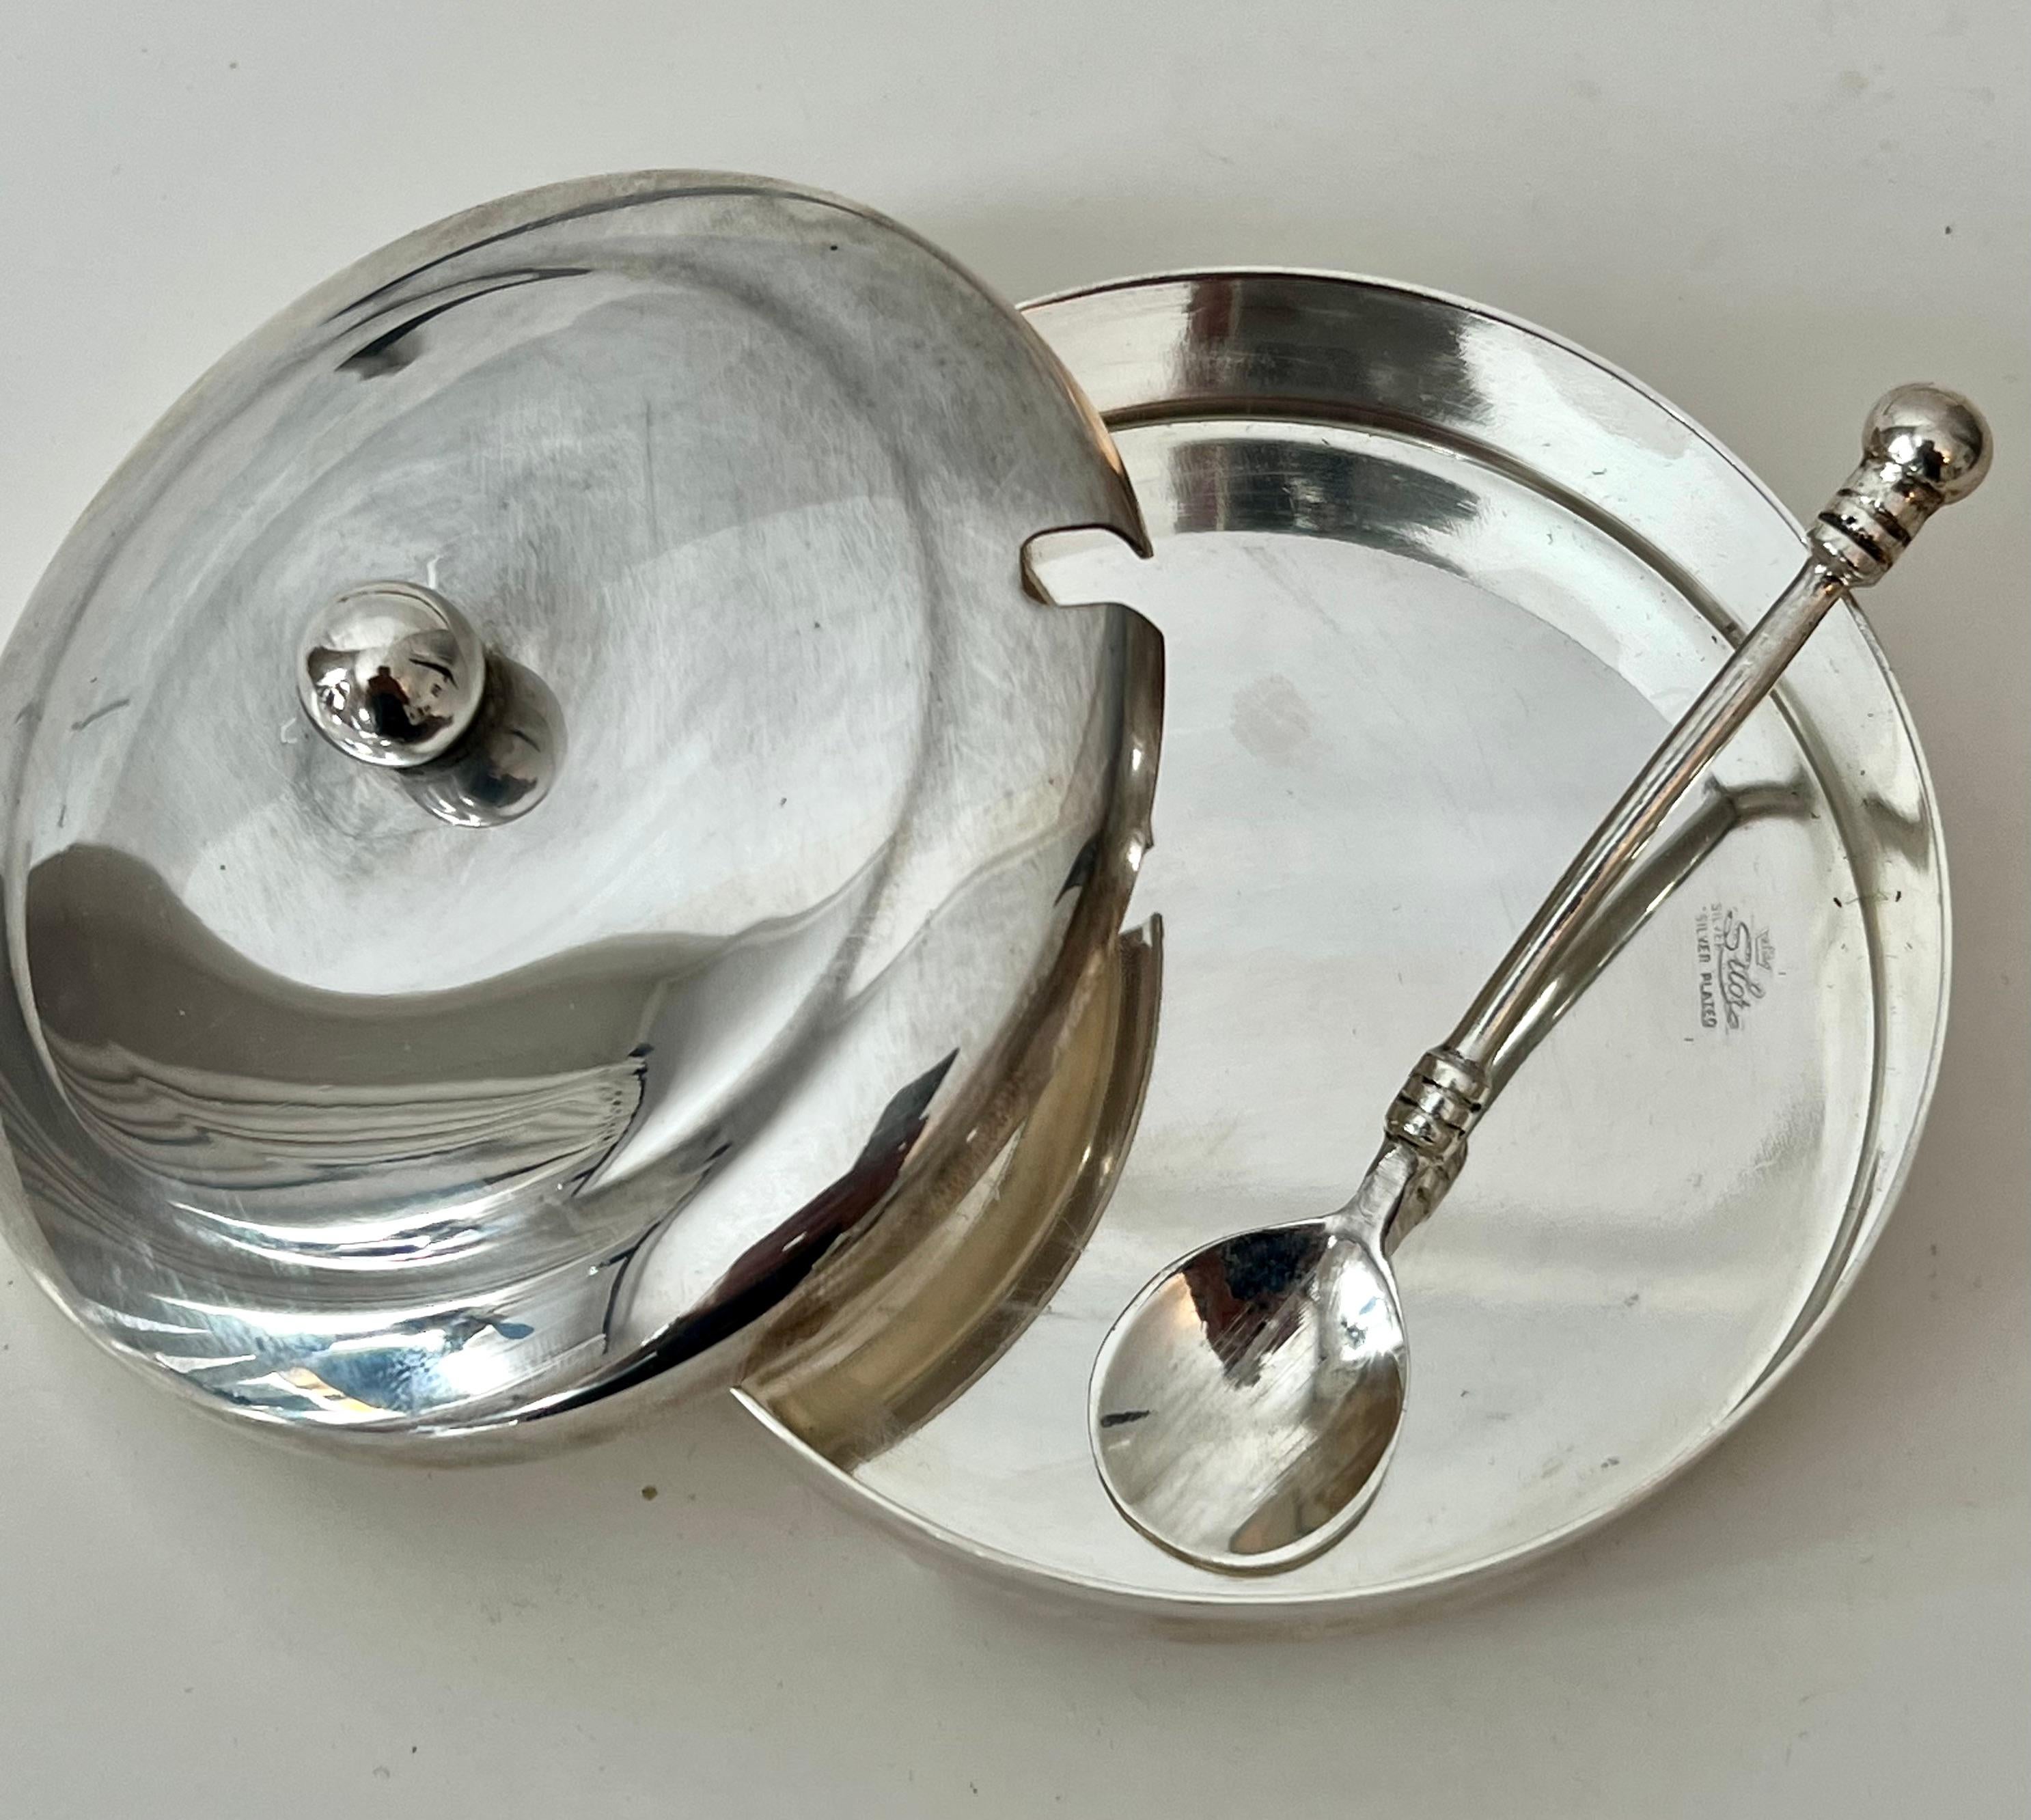 Silverplate Sugar or Condiment Bowl with Spoon In Good Condition For Sale In Los Angeles, CA